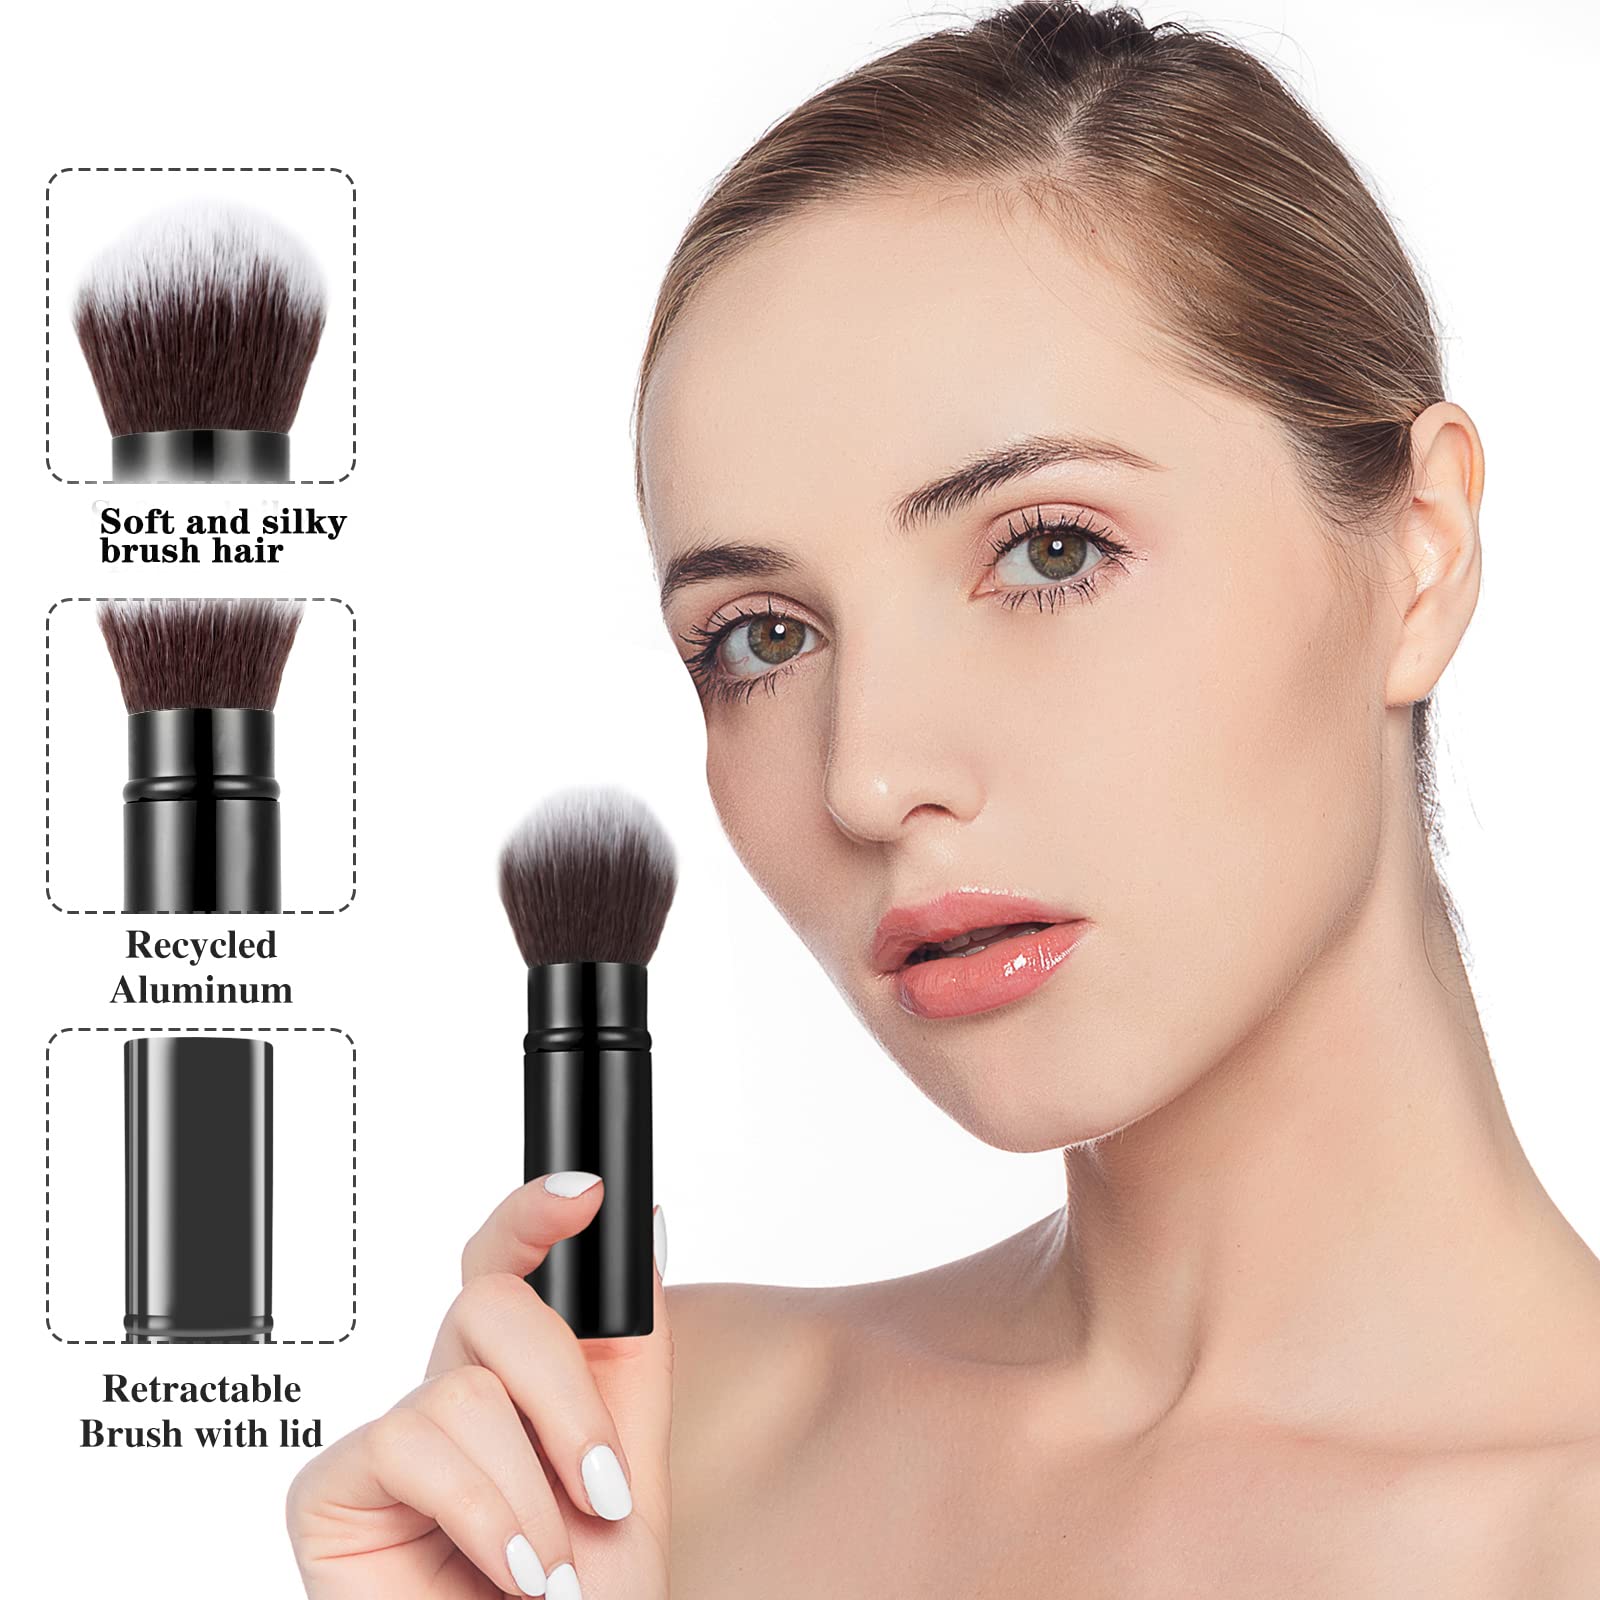 Falliny Retractable Kabuki Makeup Brushes, Travel Face Blush Brush, Portable Powder Foundation Sunscreen Brush with Cover for Blush, Bronzer, Buffing, Highlighter Flawless Powder Cosmetics